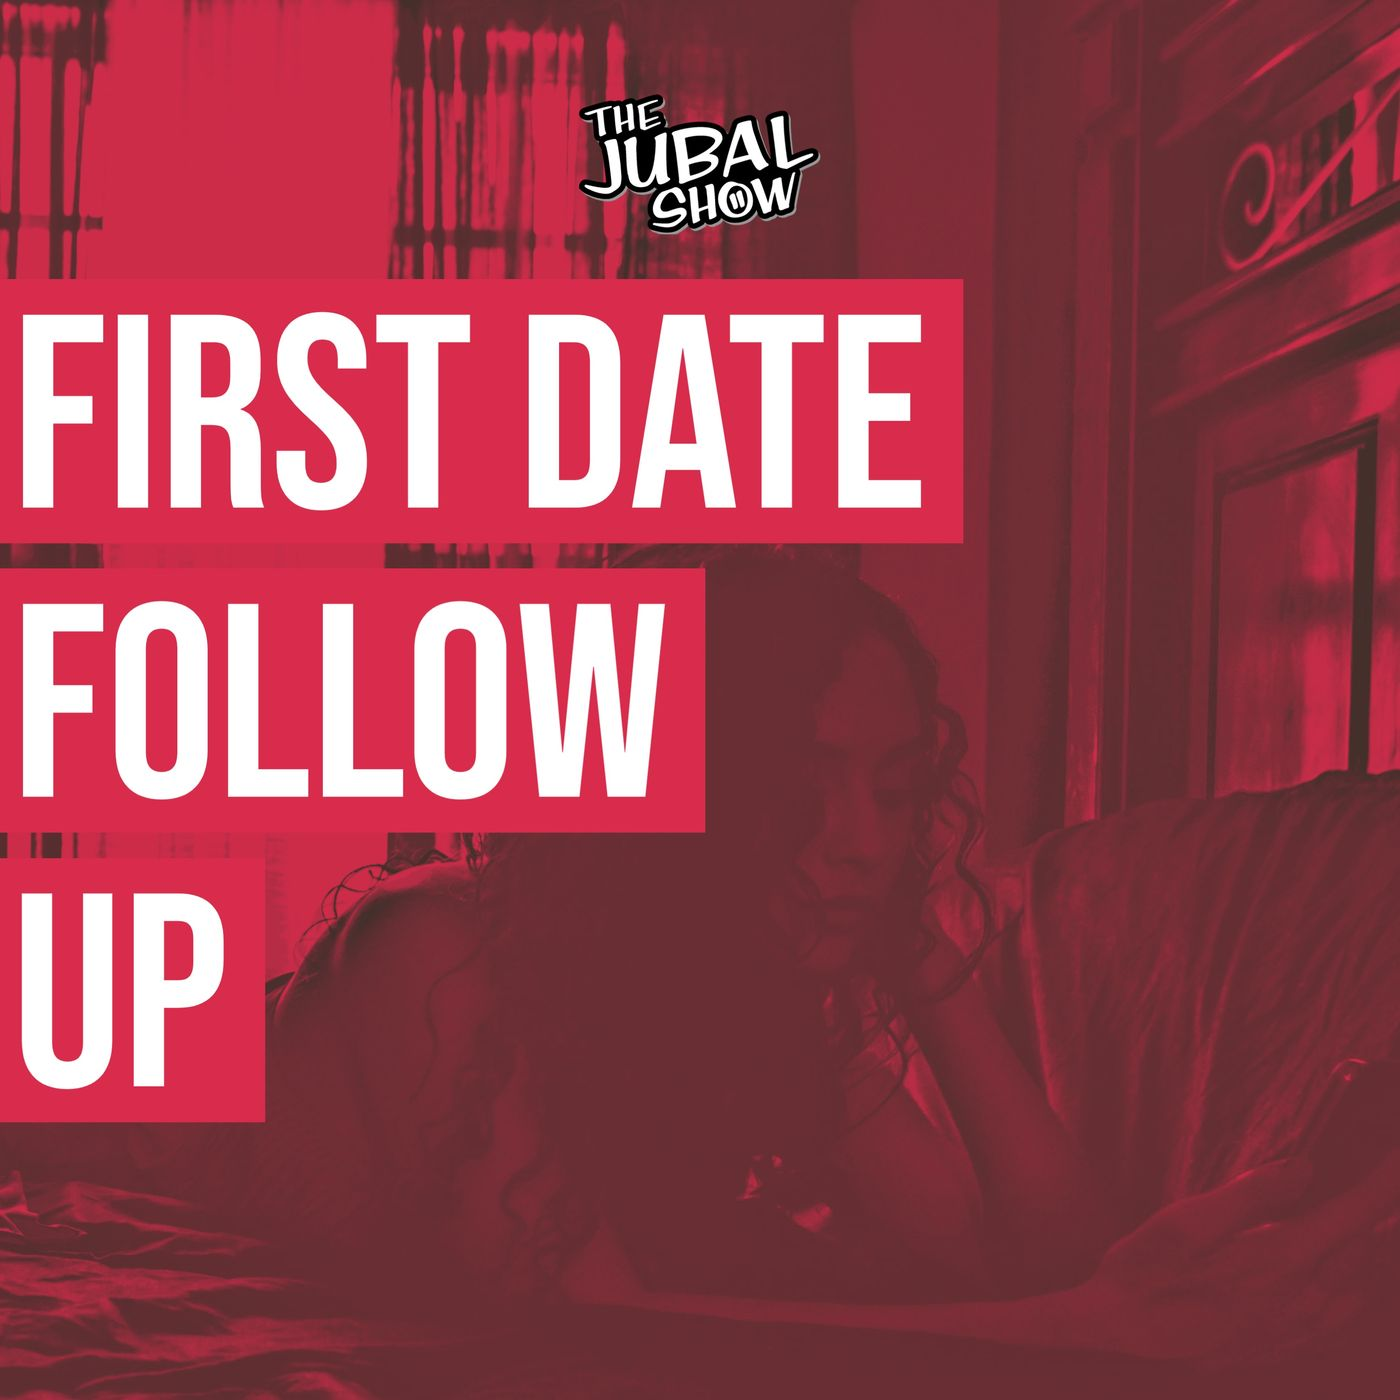 This First Date Follow Up started a huge debate on The Jubal Show!